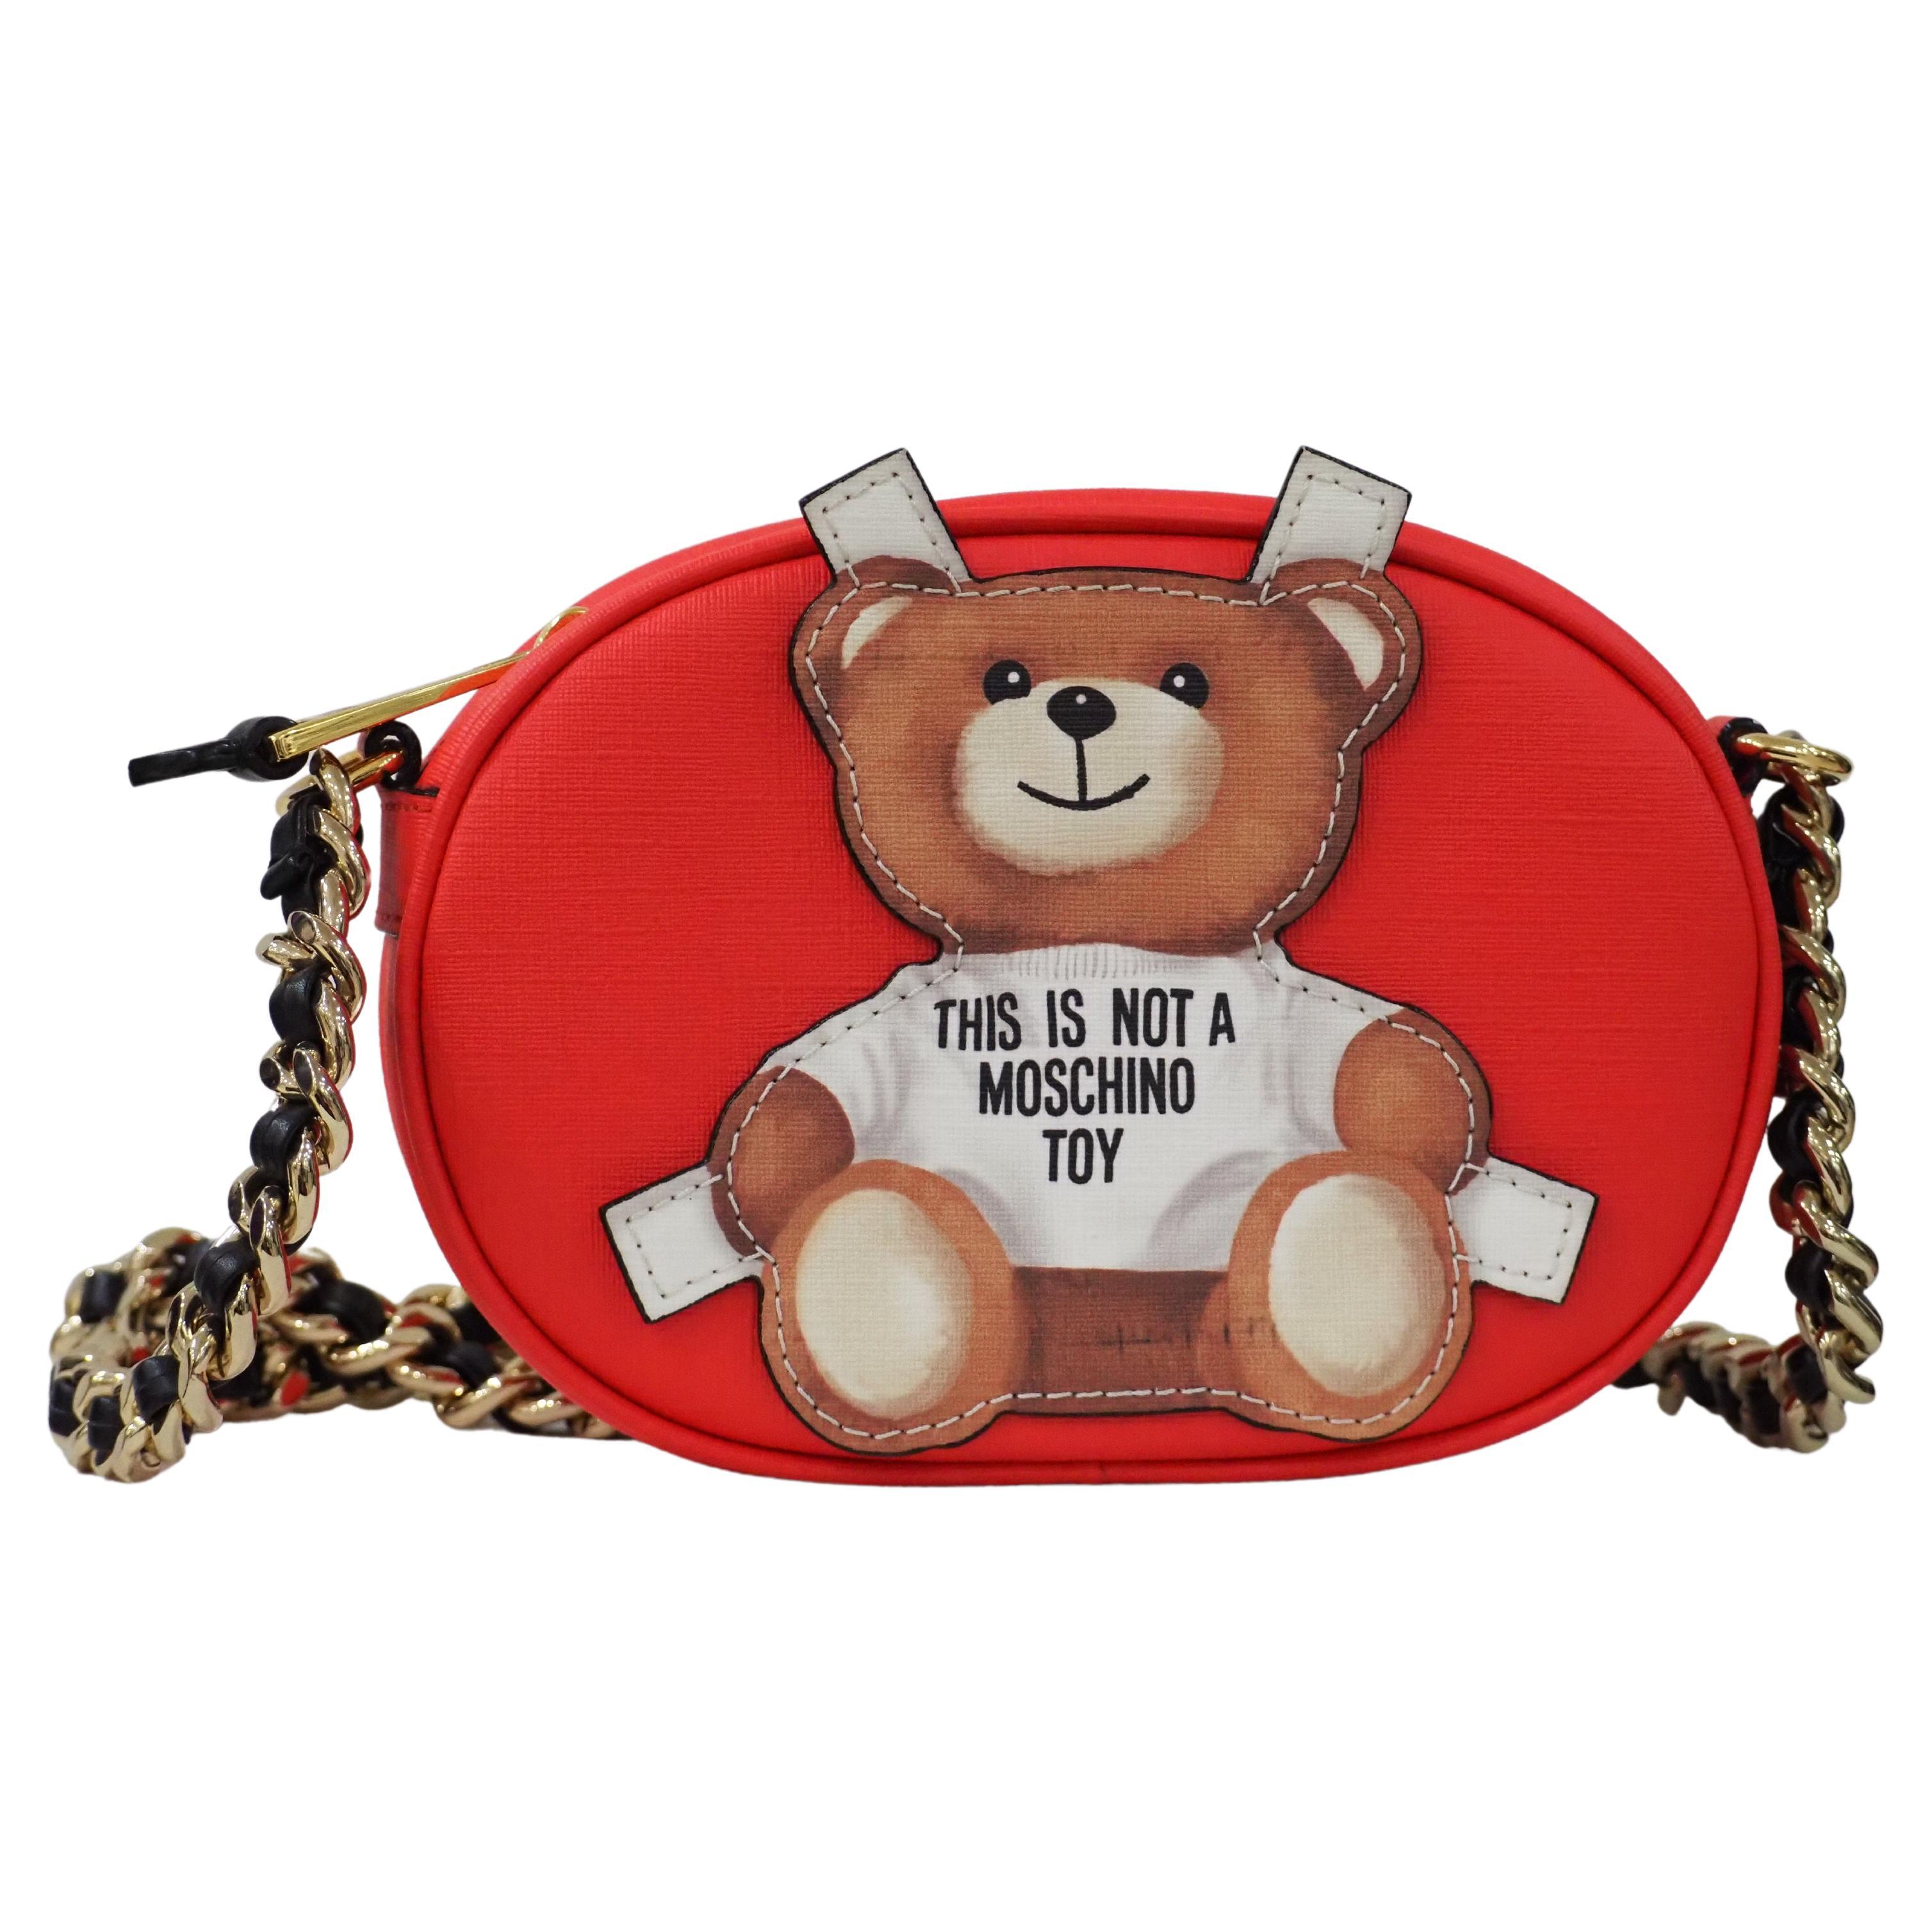 Moschino This is not a Moschino Toy red leather shoulder bag For Sale